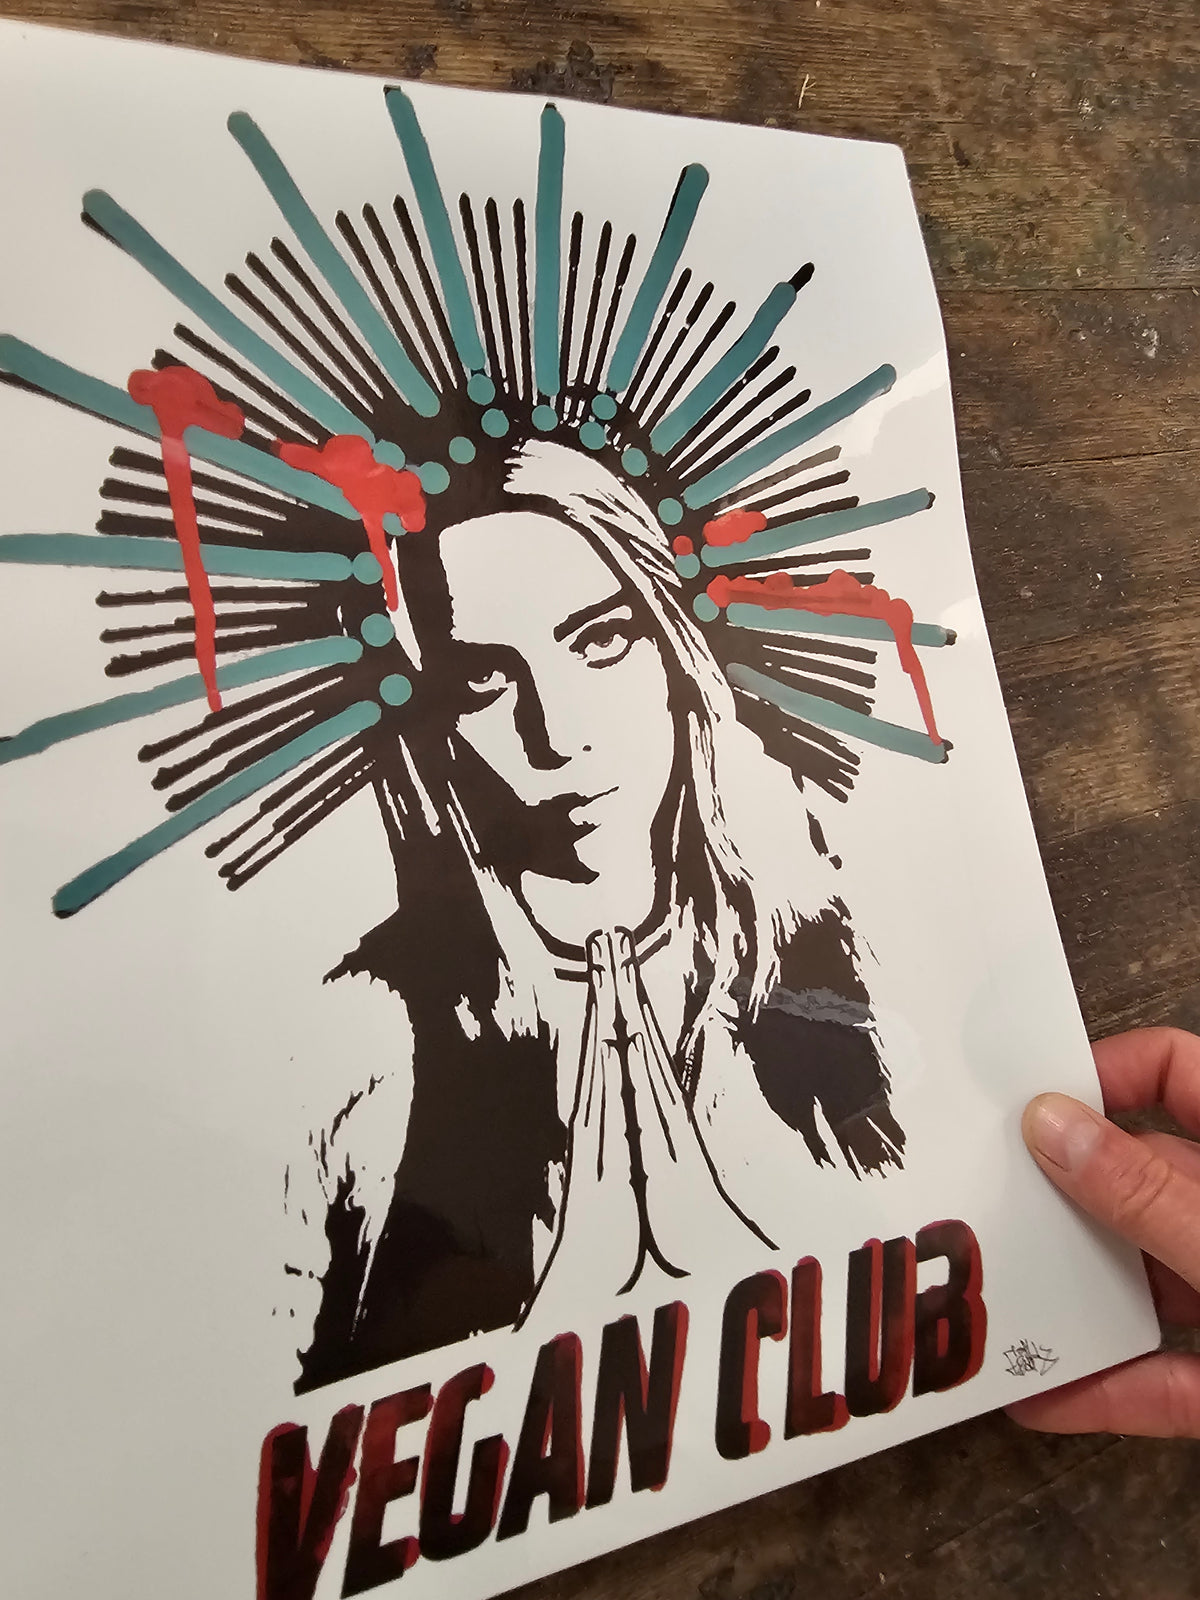 Vegan Club Billie Eilish collab with @_ebik_fgs_fh_ Waterproof Sticker 14x11 - great for Street Art on the Fly!